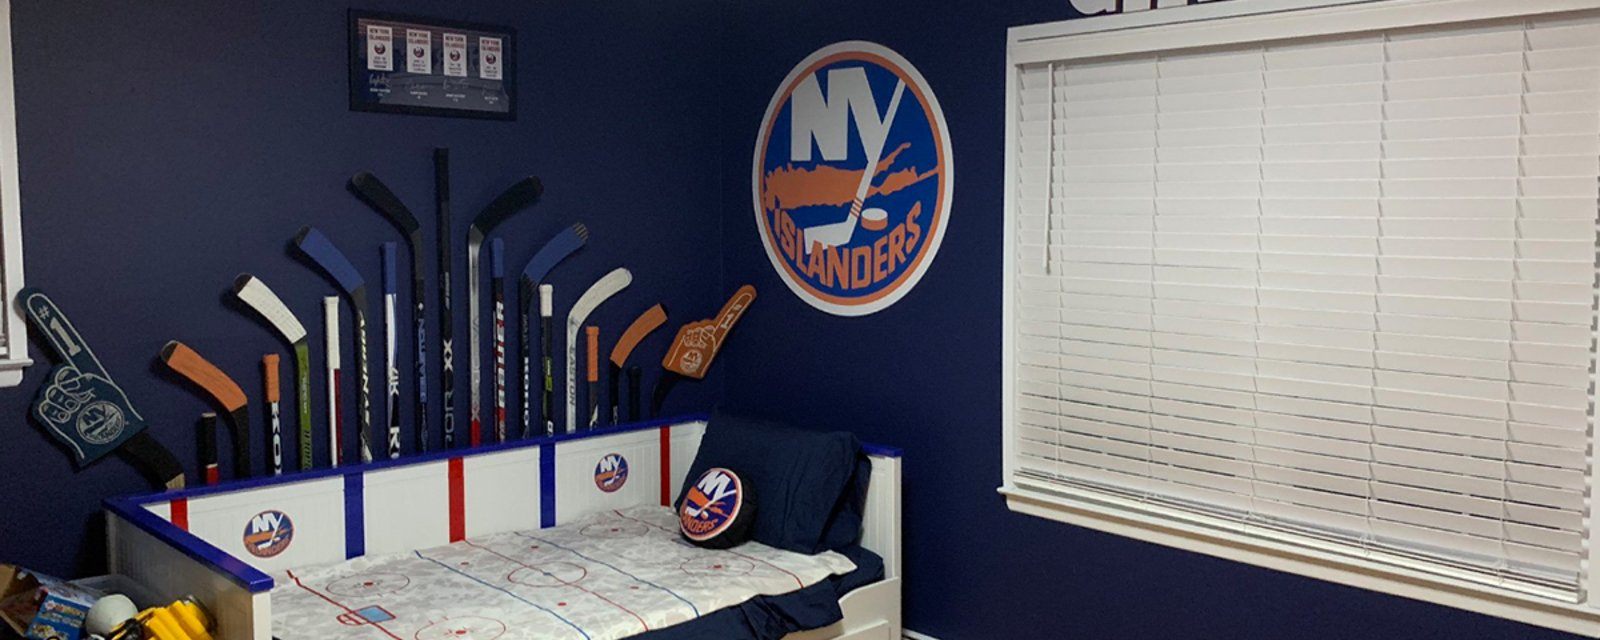 Check out this incredible Islanders themed bedroom for 3-year-old boy